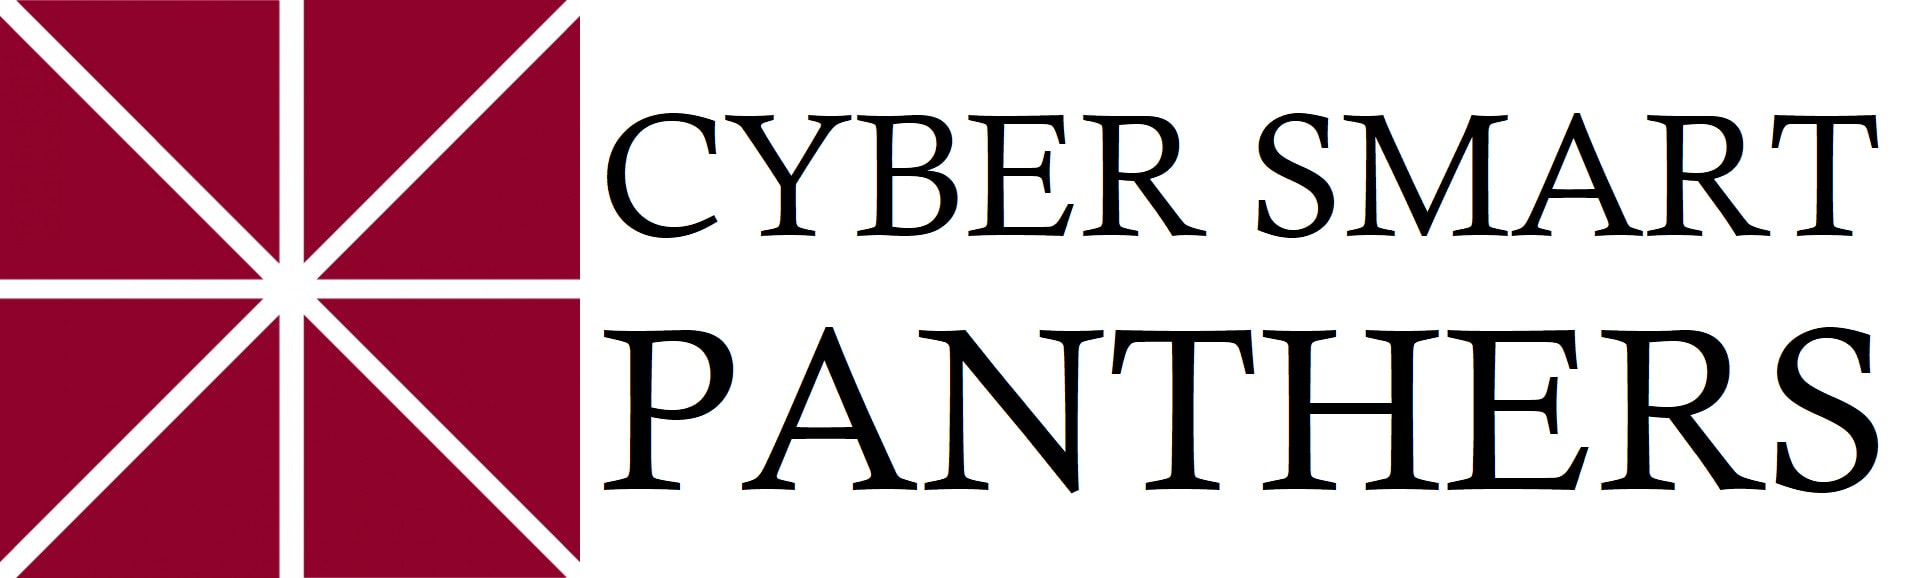 CYBER SMART PANTHERS